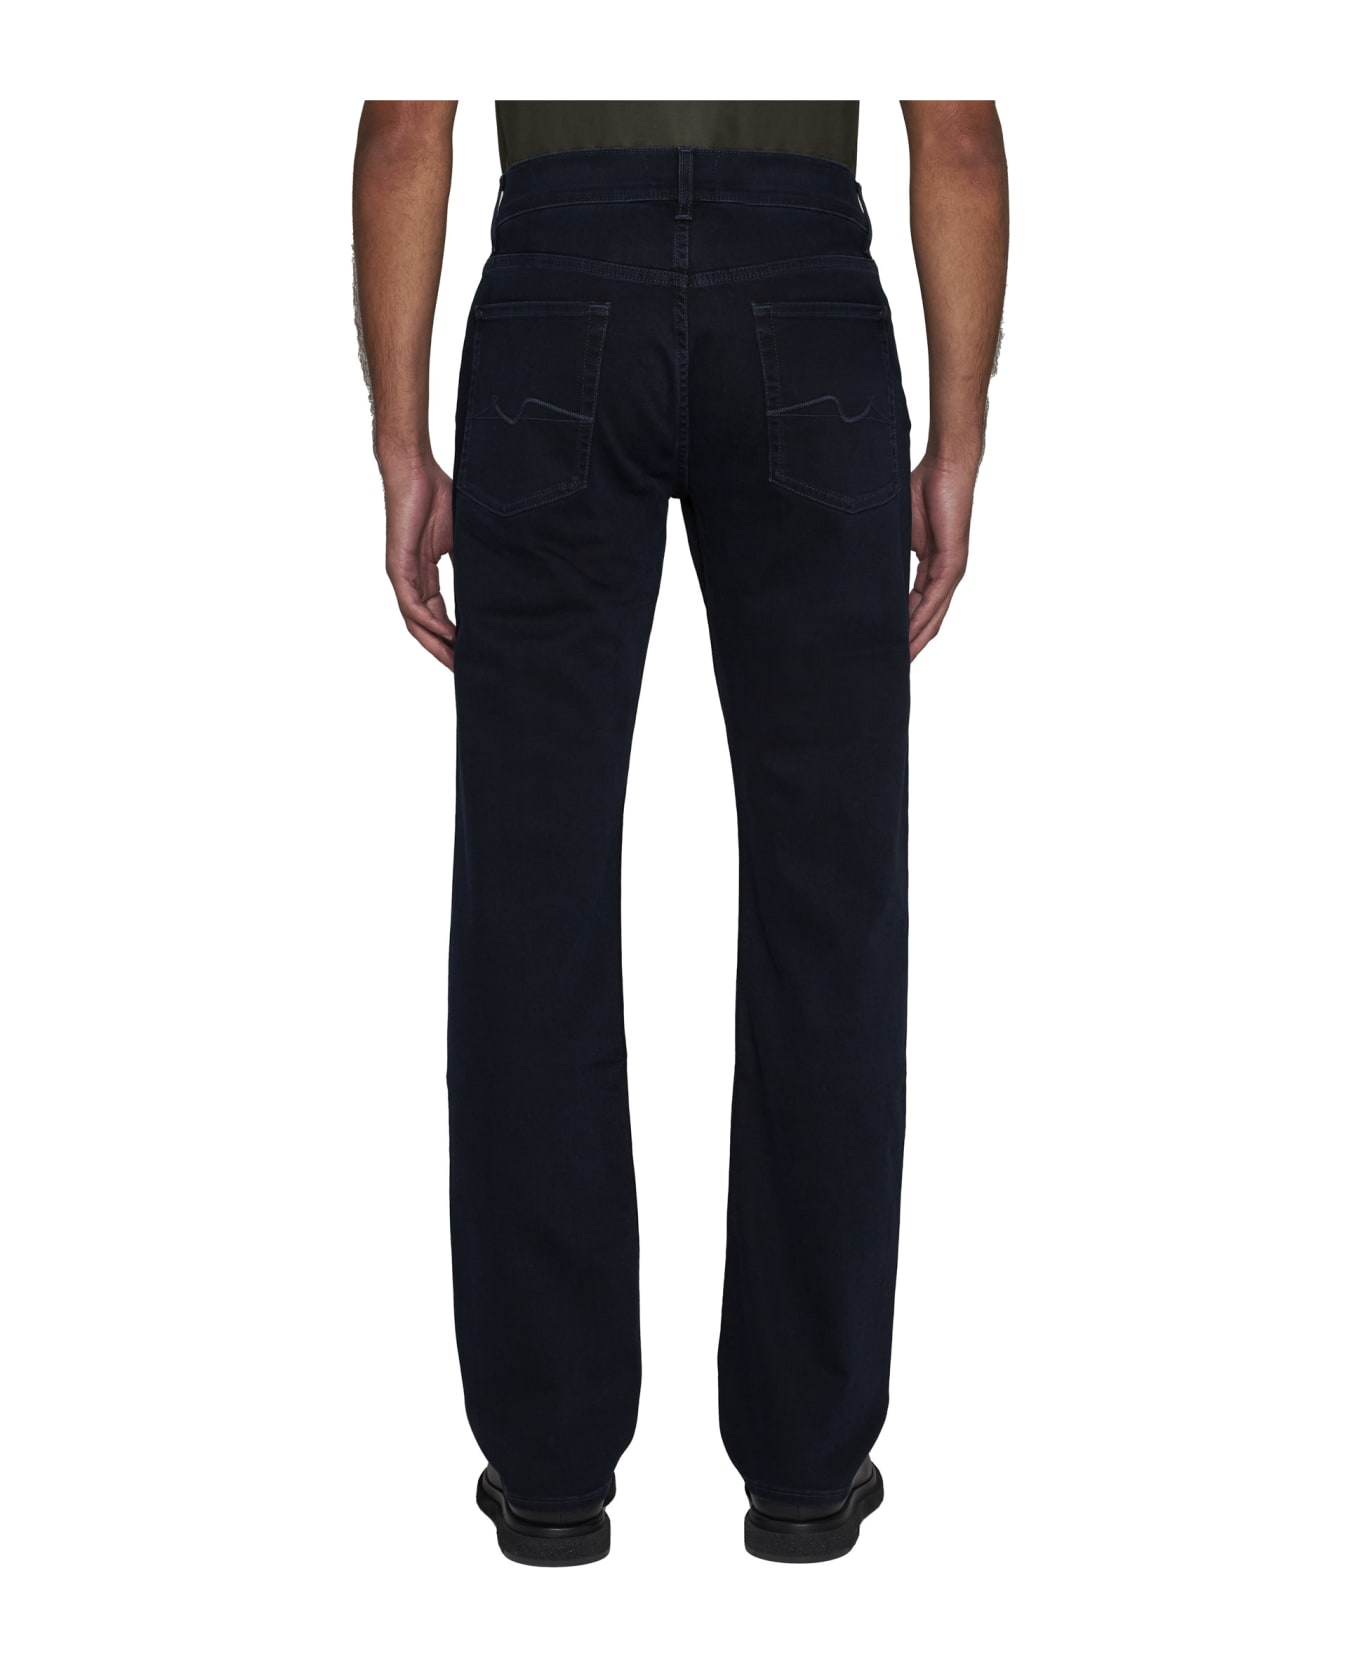 7 For All Mankind Jeans - Dark blue